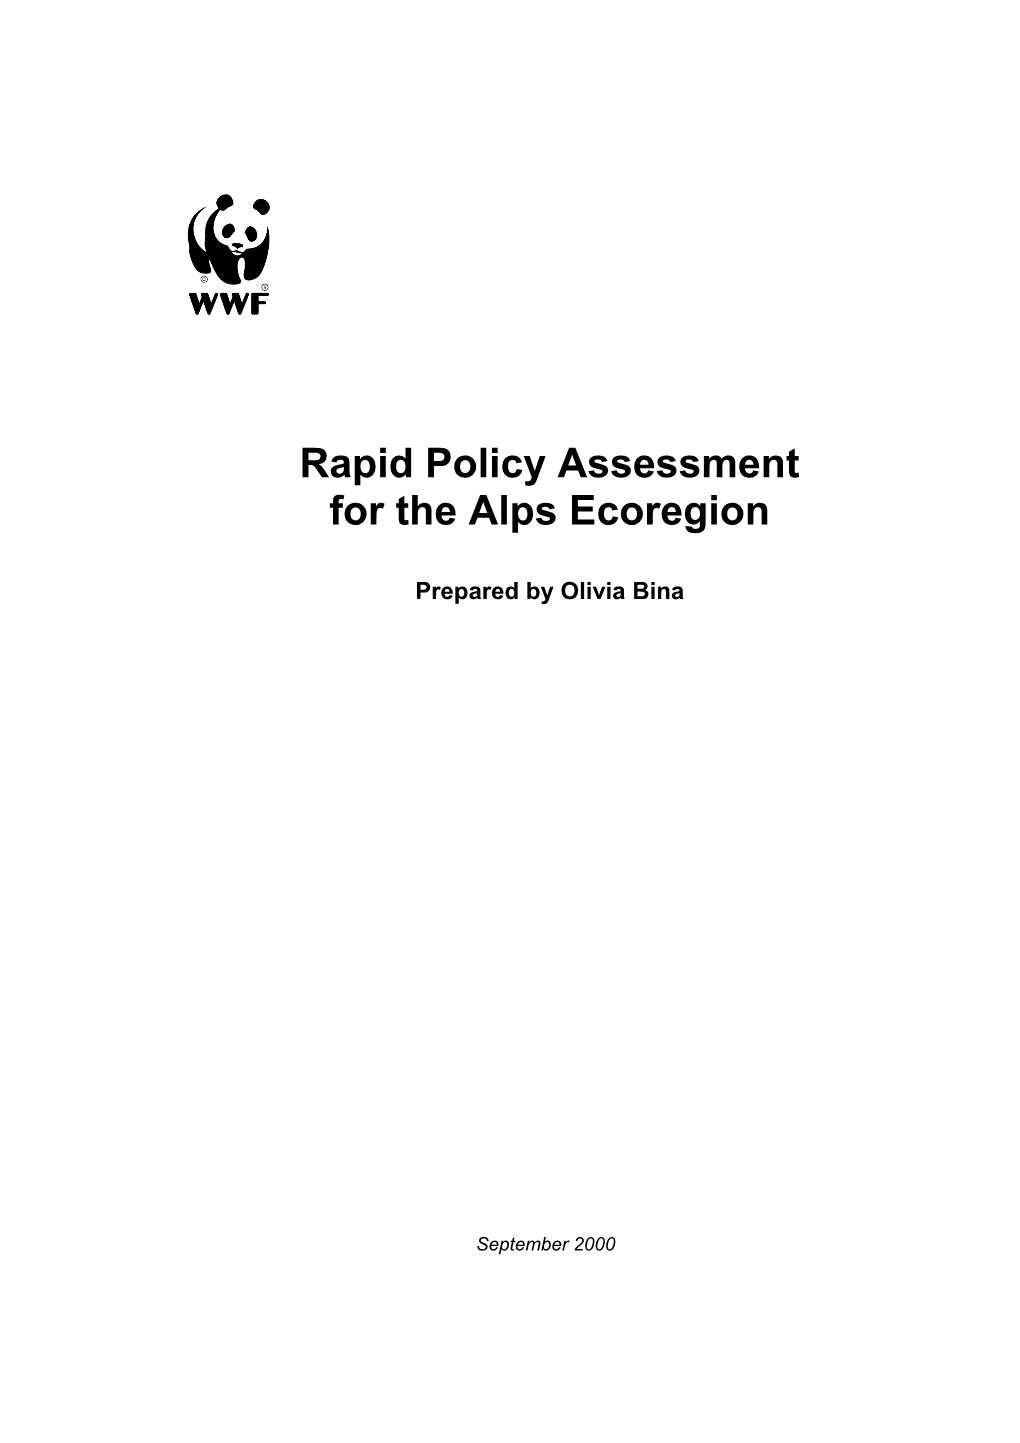 For the Alps Ecoregion